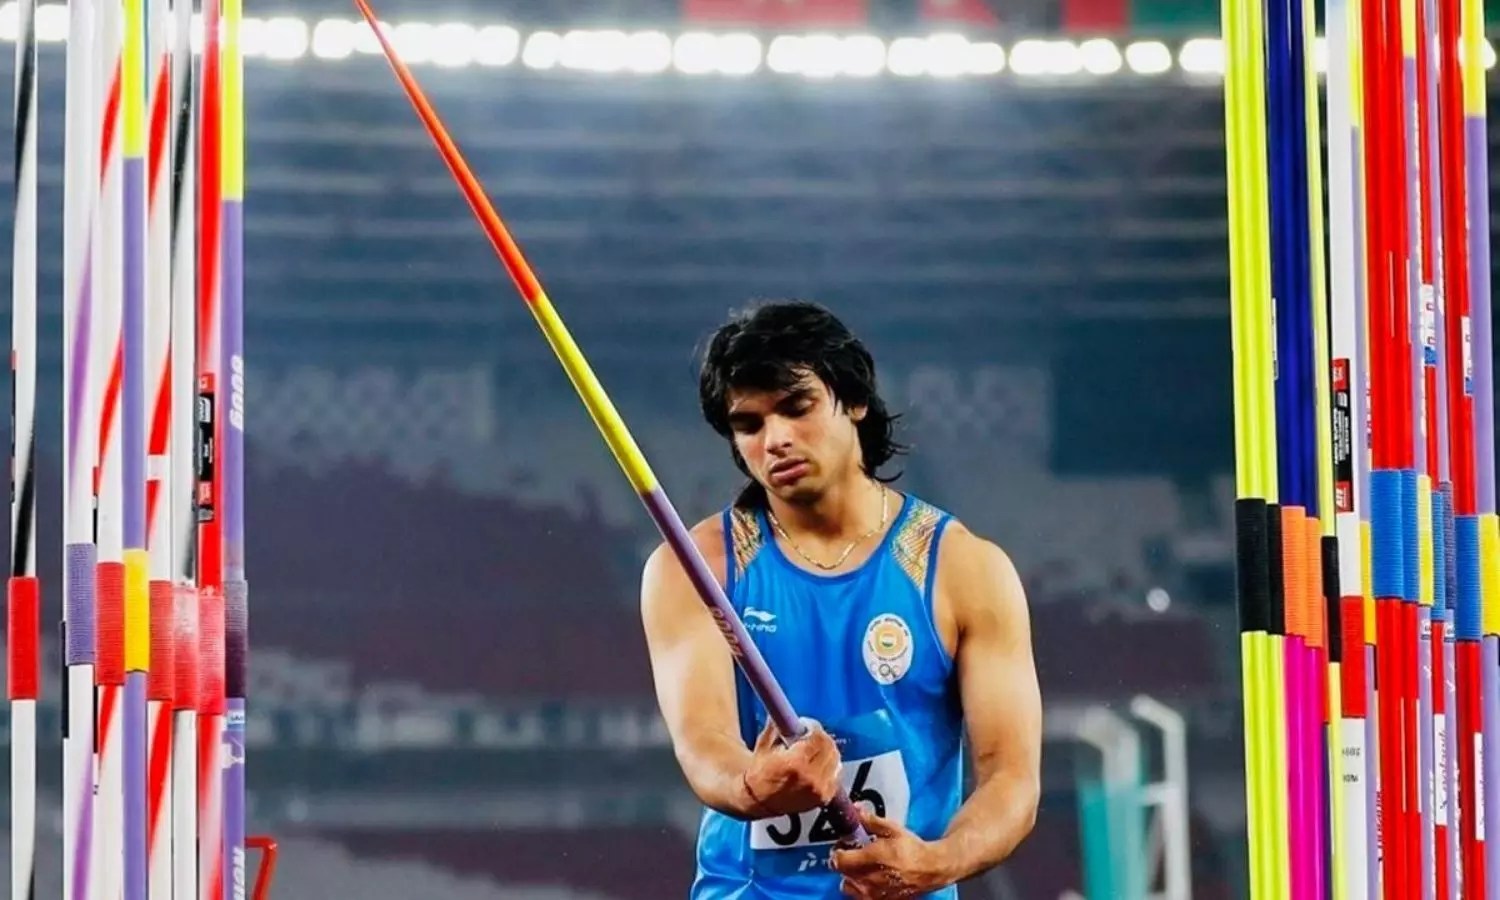 World Athletics Championships 2022 LIVE: India javelin throw star Neeraj Chopra in positive mood, says ‘got personal best twice last month, I have become confident’